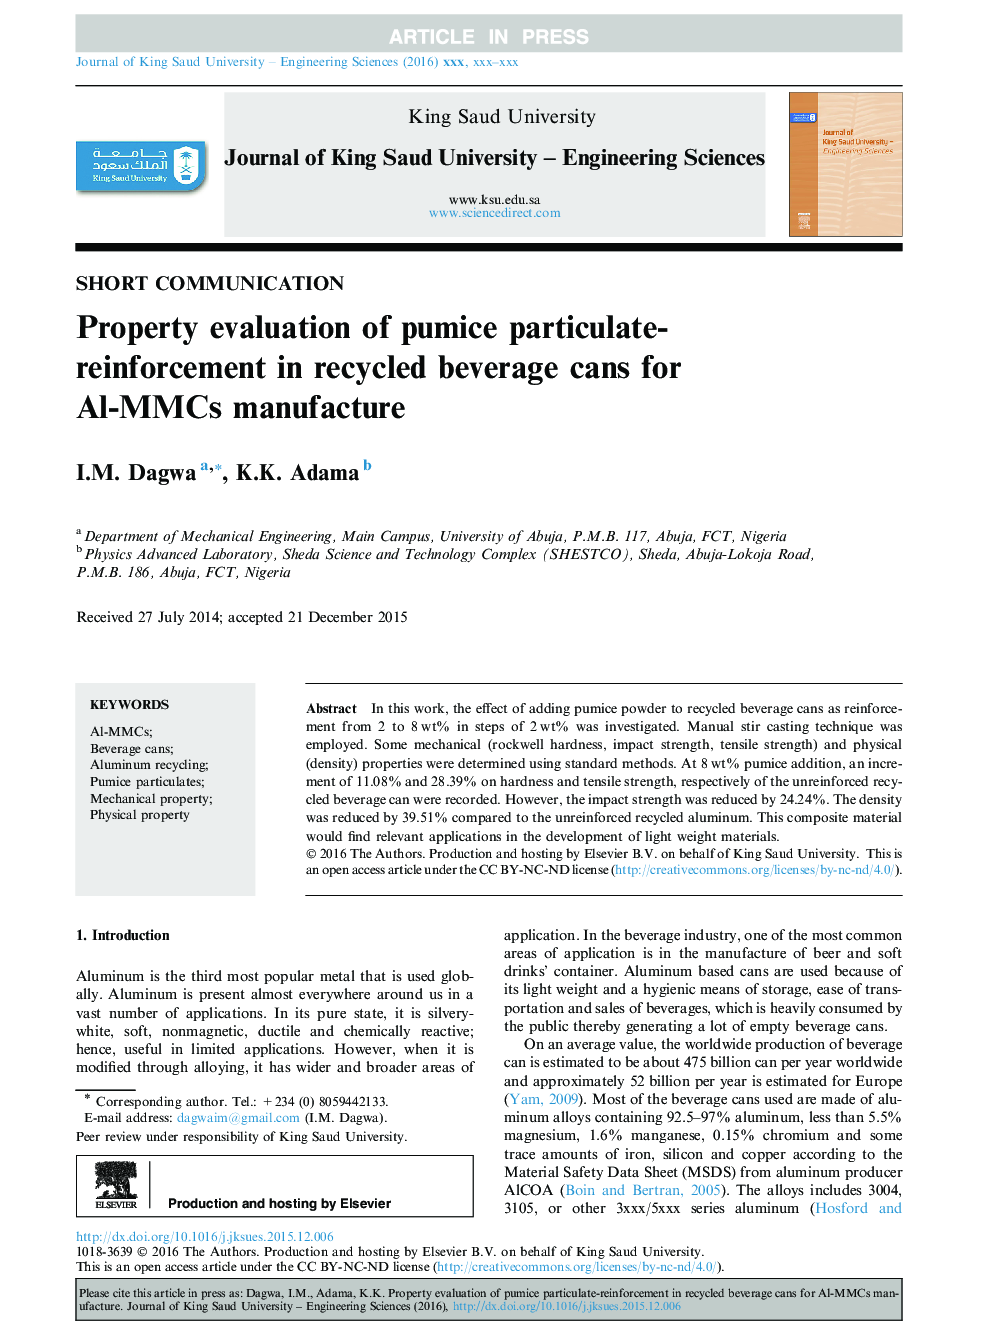 Property evaluation of pumice particulate-reinforcement in recycled beverage cans for Al-MMCs manufacture